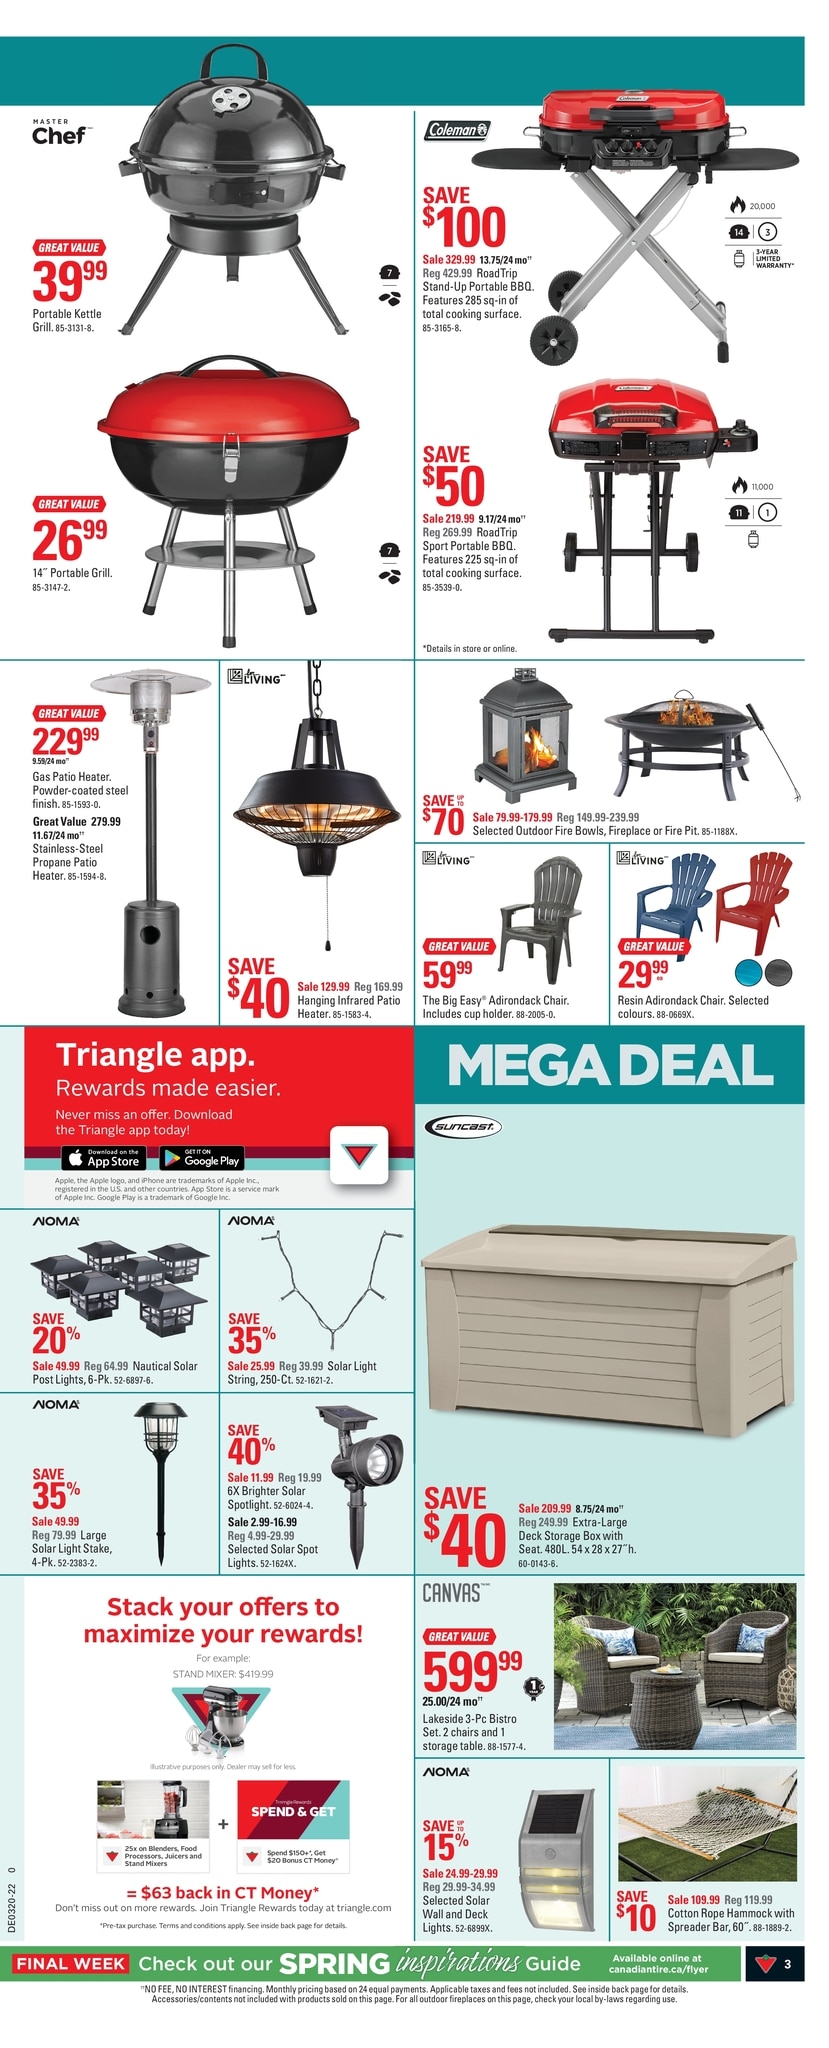 Canadian Tire - Weekly Flyer Specials - Page 3